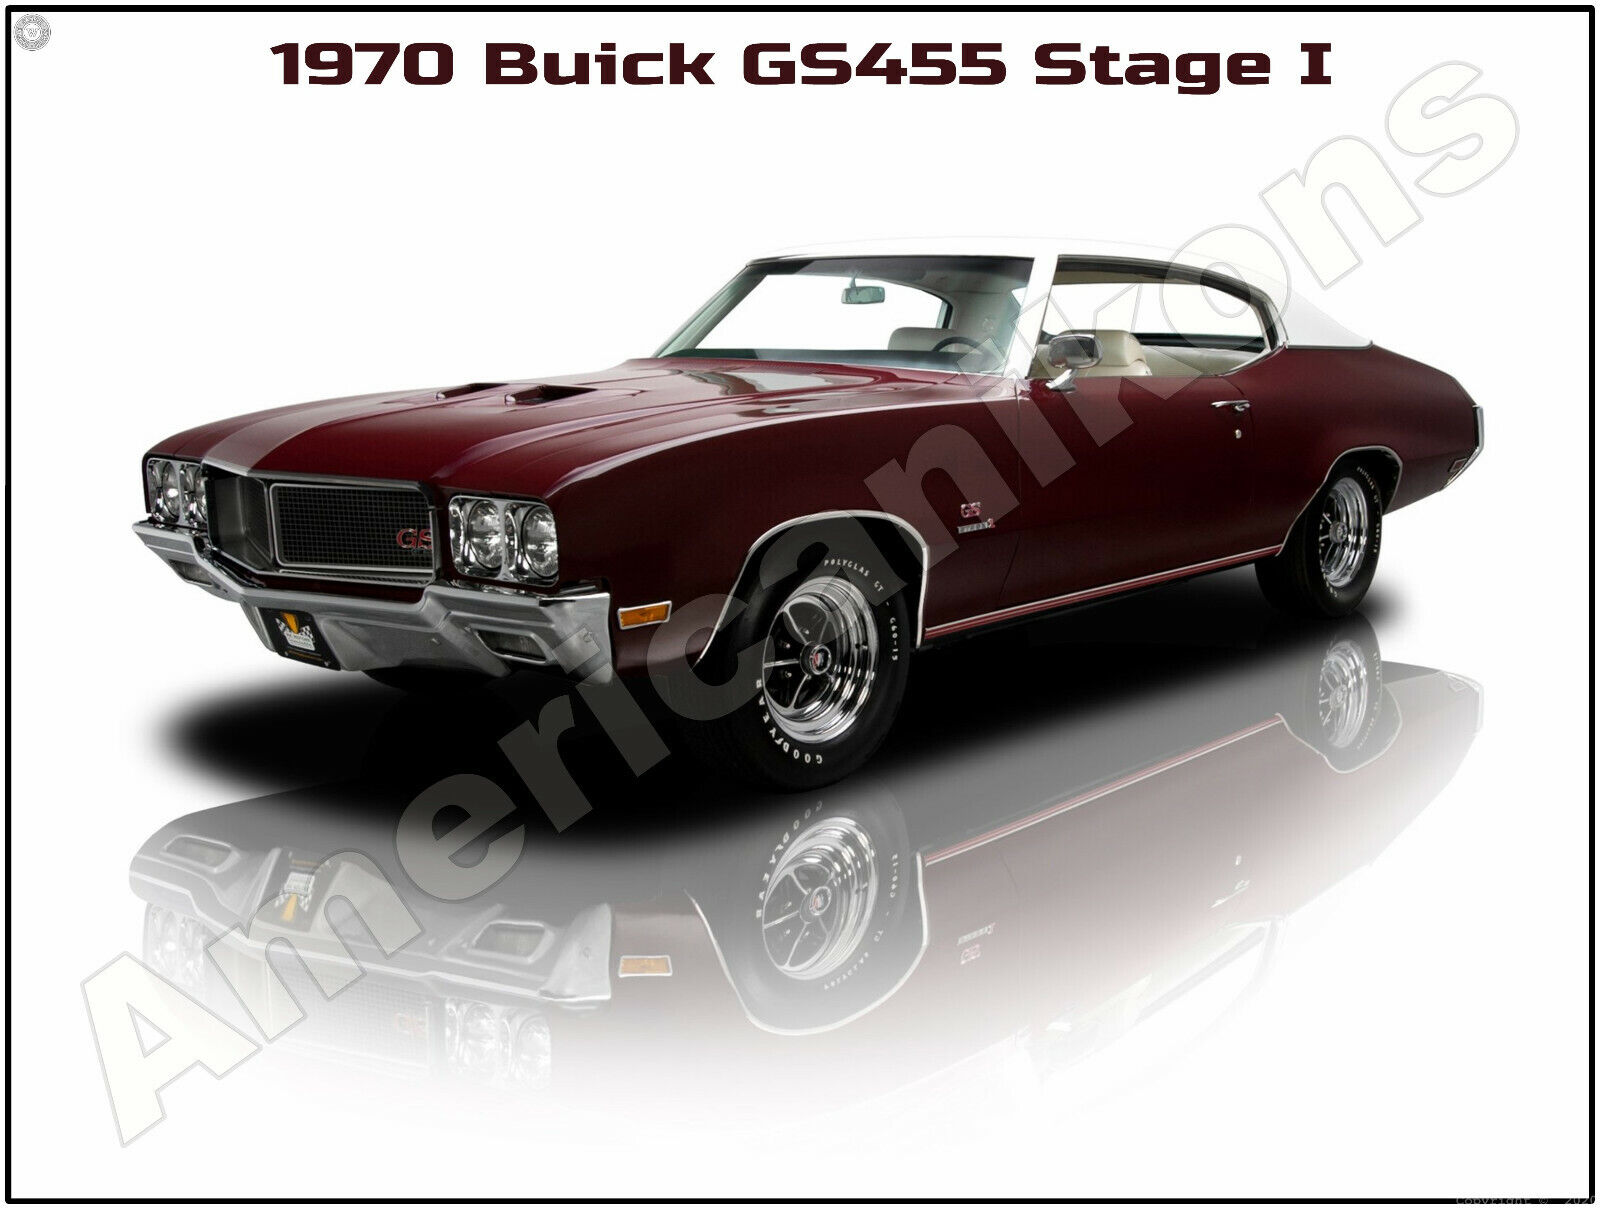 1970 Buick GS455 Stage I New Metal Sign: Pristine Restoration - Large Size